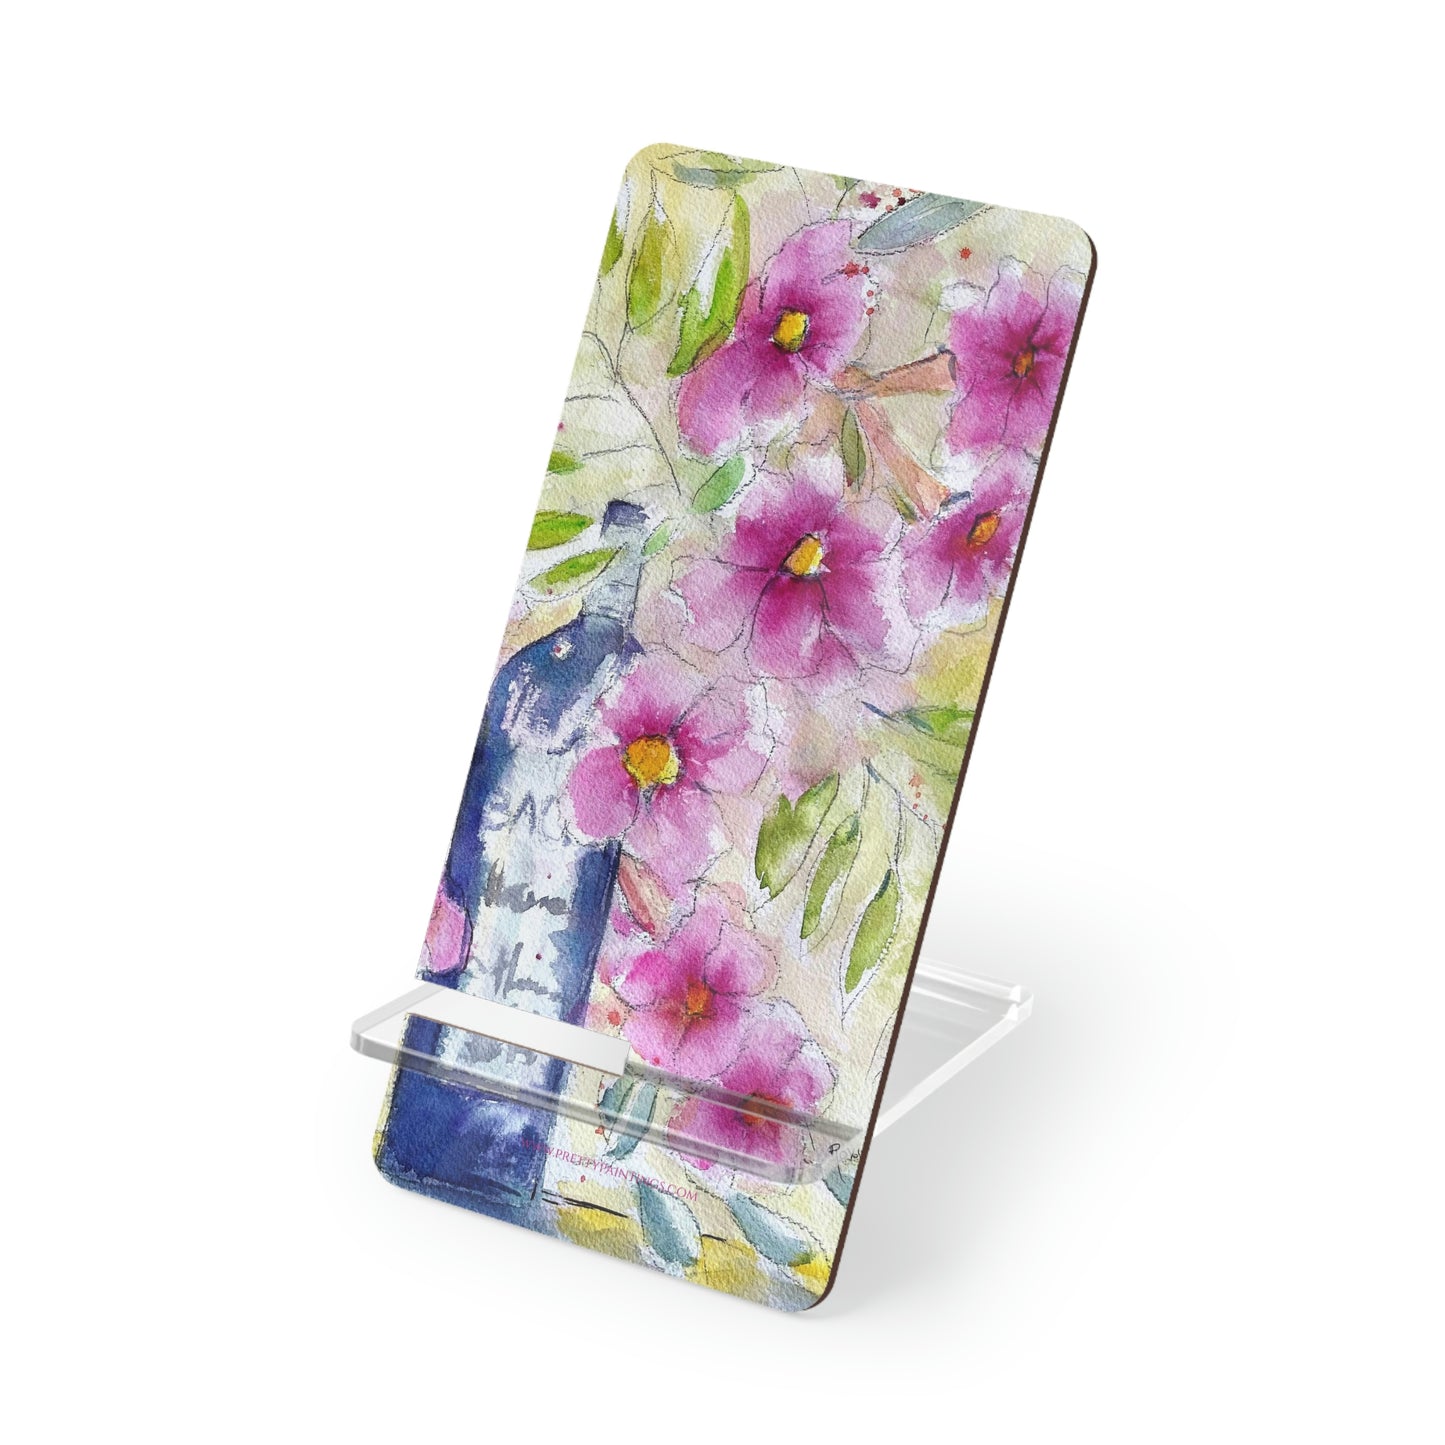 Bottle and Blooms Phone Stand with Wine Bottle and Pink Trumpet Vine